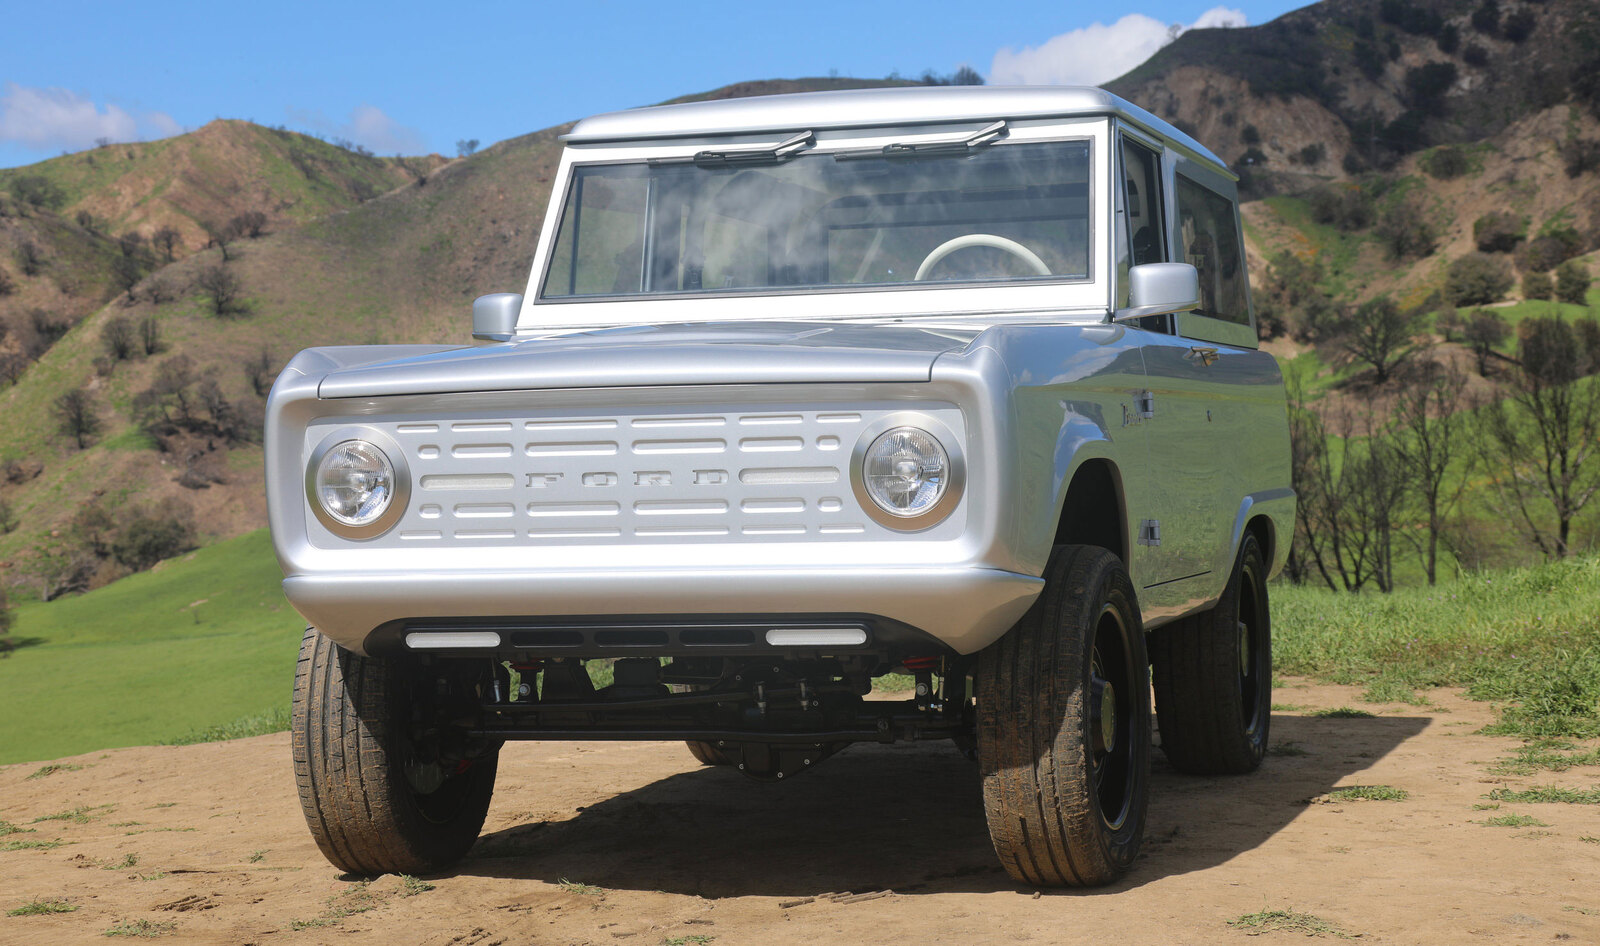 The Redesigned Ford Bronco Is Fully Electric and Vegan-Friendly